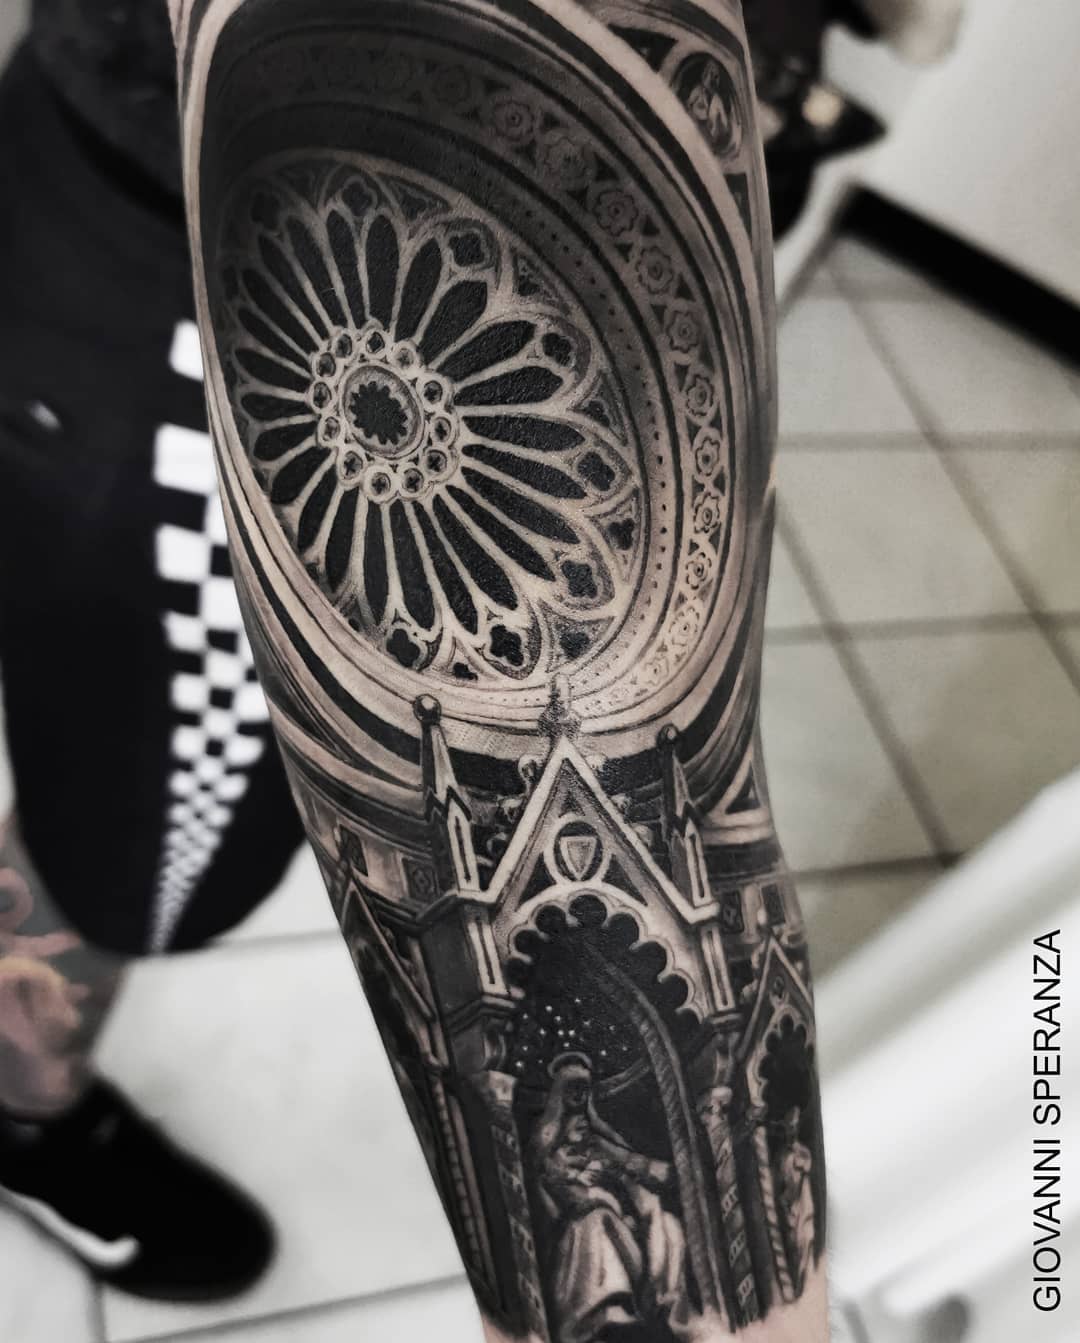 The shading on this tattoo is remarkable